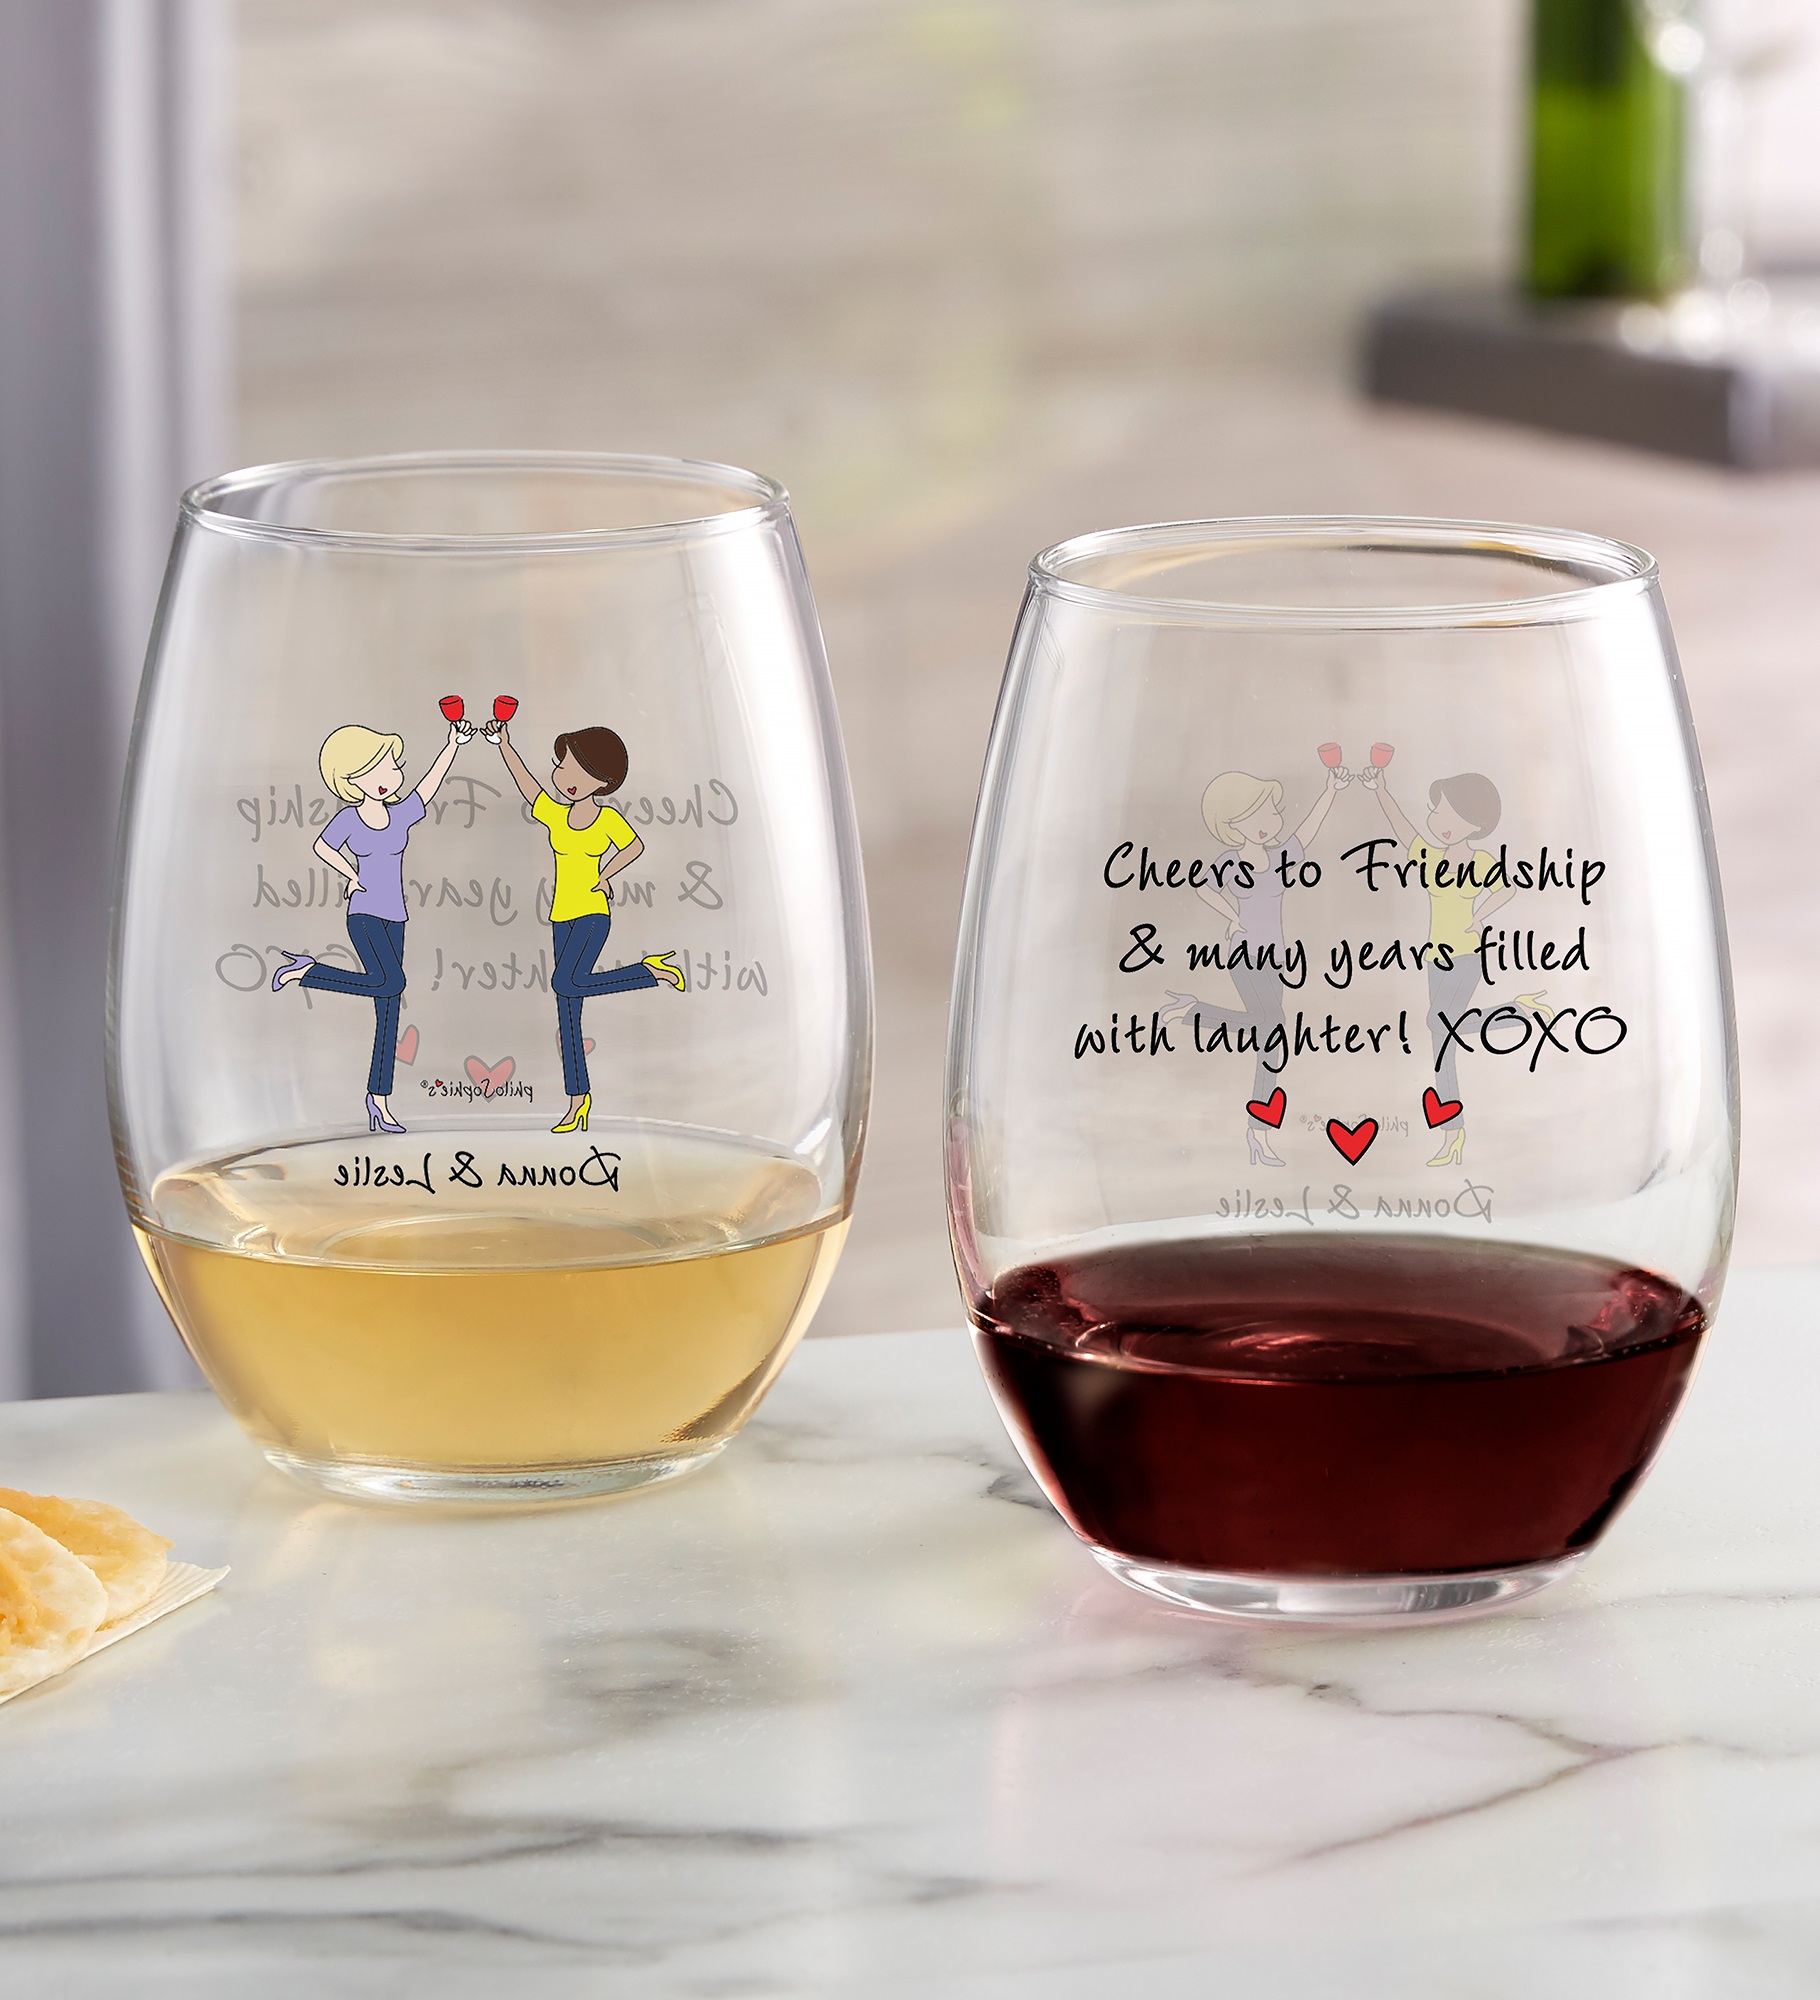 Cheers to Friendship philoSophie's® Personalized Wine Glasses